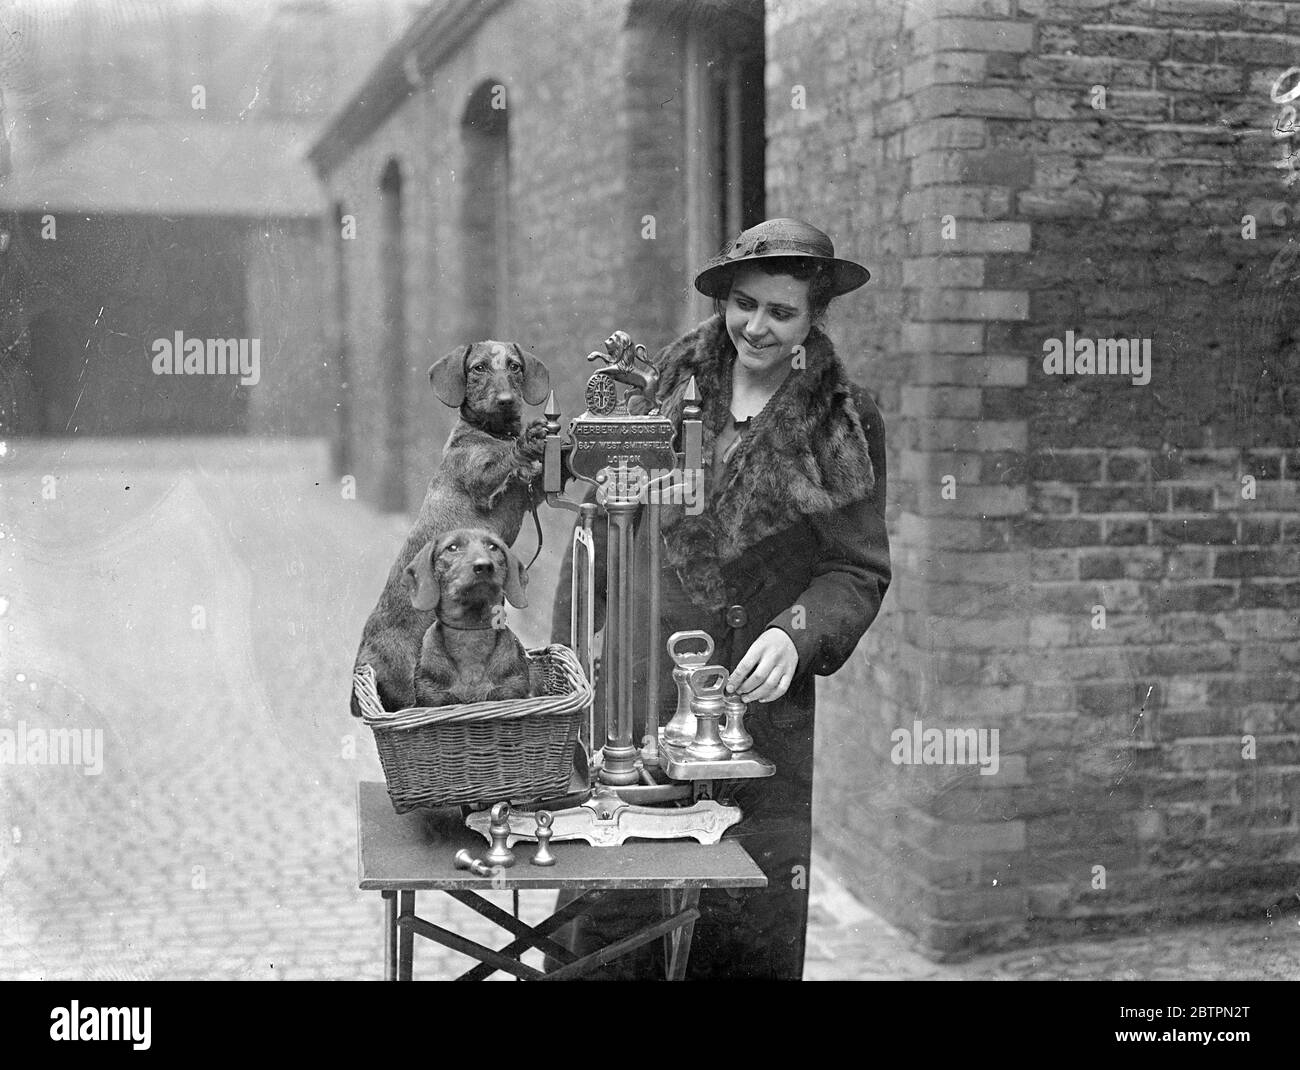 Weighing in at Dachshund show. The Dachshund championship show in progress at Tattersalls, Knightsbridge. Photo shows, Miss Dorothy Gocher of Waltham Cross weighing her puppies 'Konigsberg Frolic' (standing on scales) and 'Fruleh' (in basket). 14 April 1937 Stock Photo